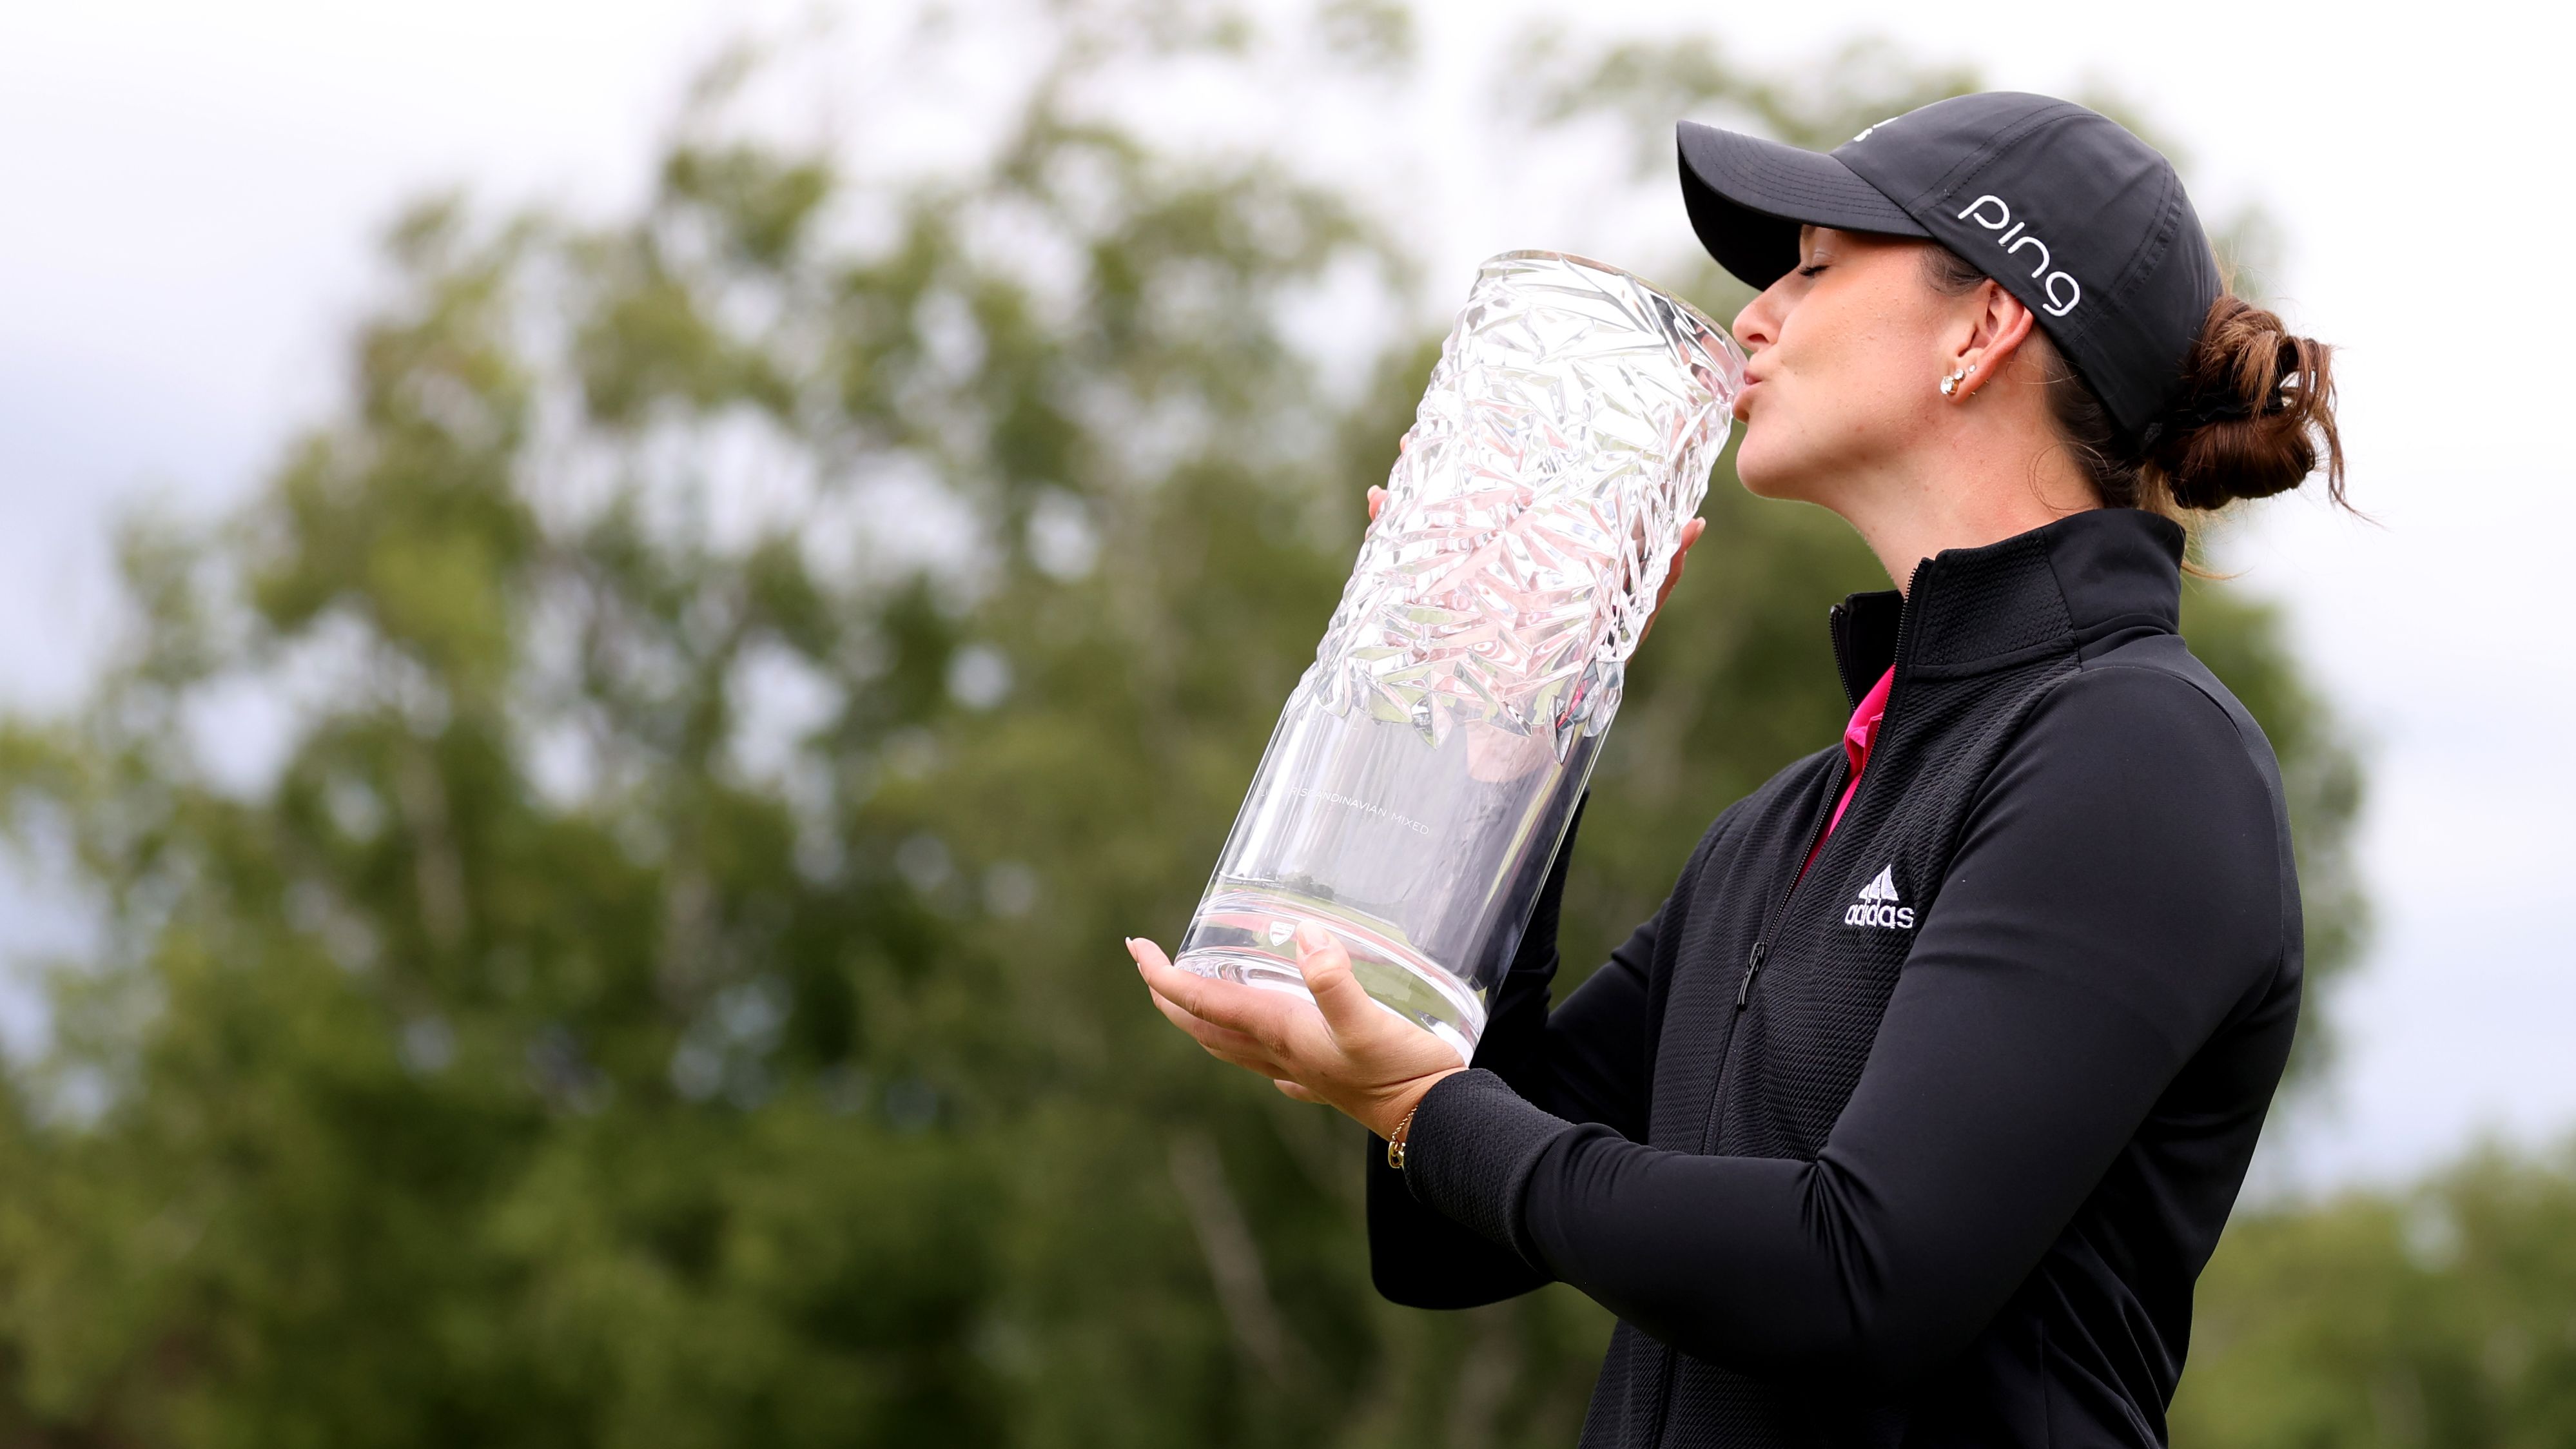 Linn Grant poses with the trophy after winning the Scandinavian Mixed, in Halmstad, Sweden, on June 12, 2022.